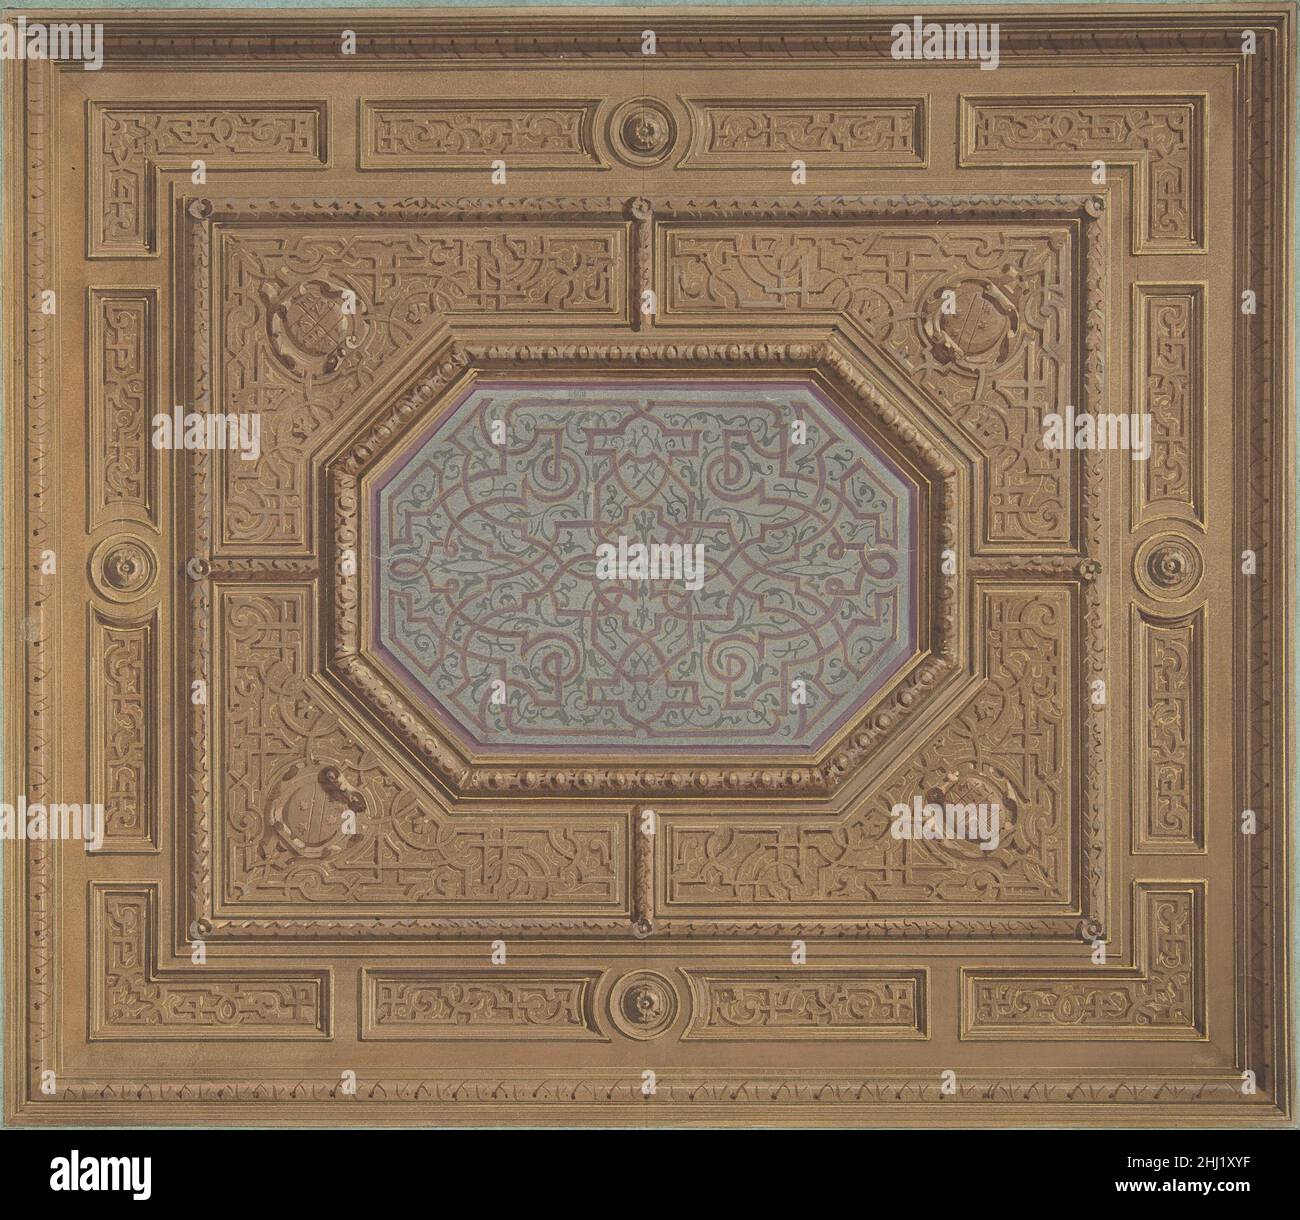 Design for Dining Room Ceiling, Neudeck second half 19th century Jules-Edmond-Charles Lachaise French. Design for Dining Room Ceiling, Neudeck  345460 Stock Photo